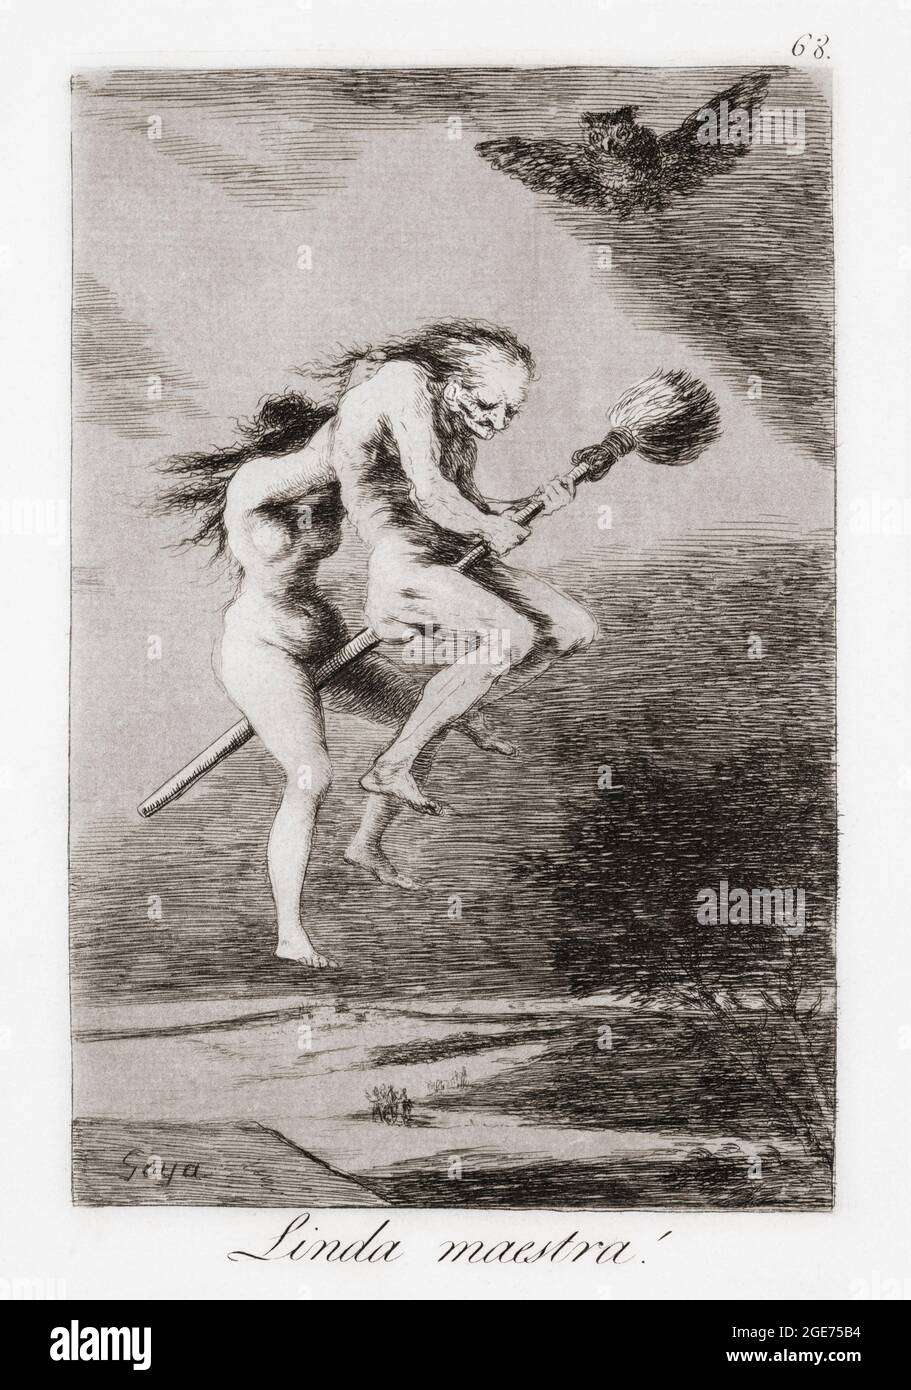 Linda Maestra! or Pretty Teacher!  A young witch teaches an old man to fly.  After the work by Francisco Goya, Capricho number 68.  Goya created the 80 prints of Los Caprichos in 1797-1798. Stock Photo